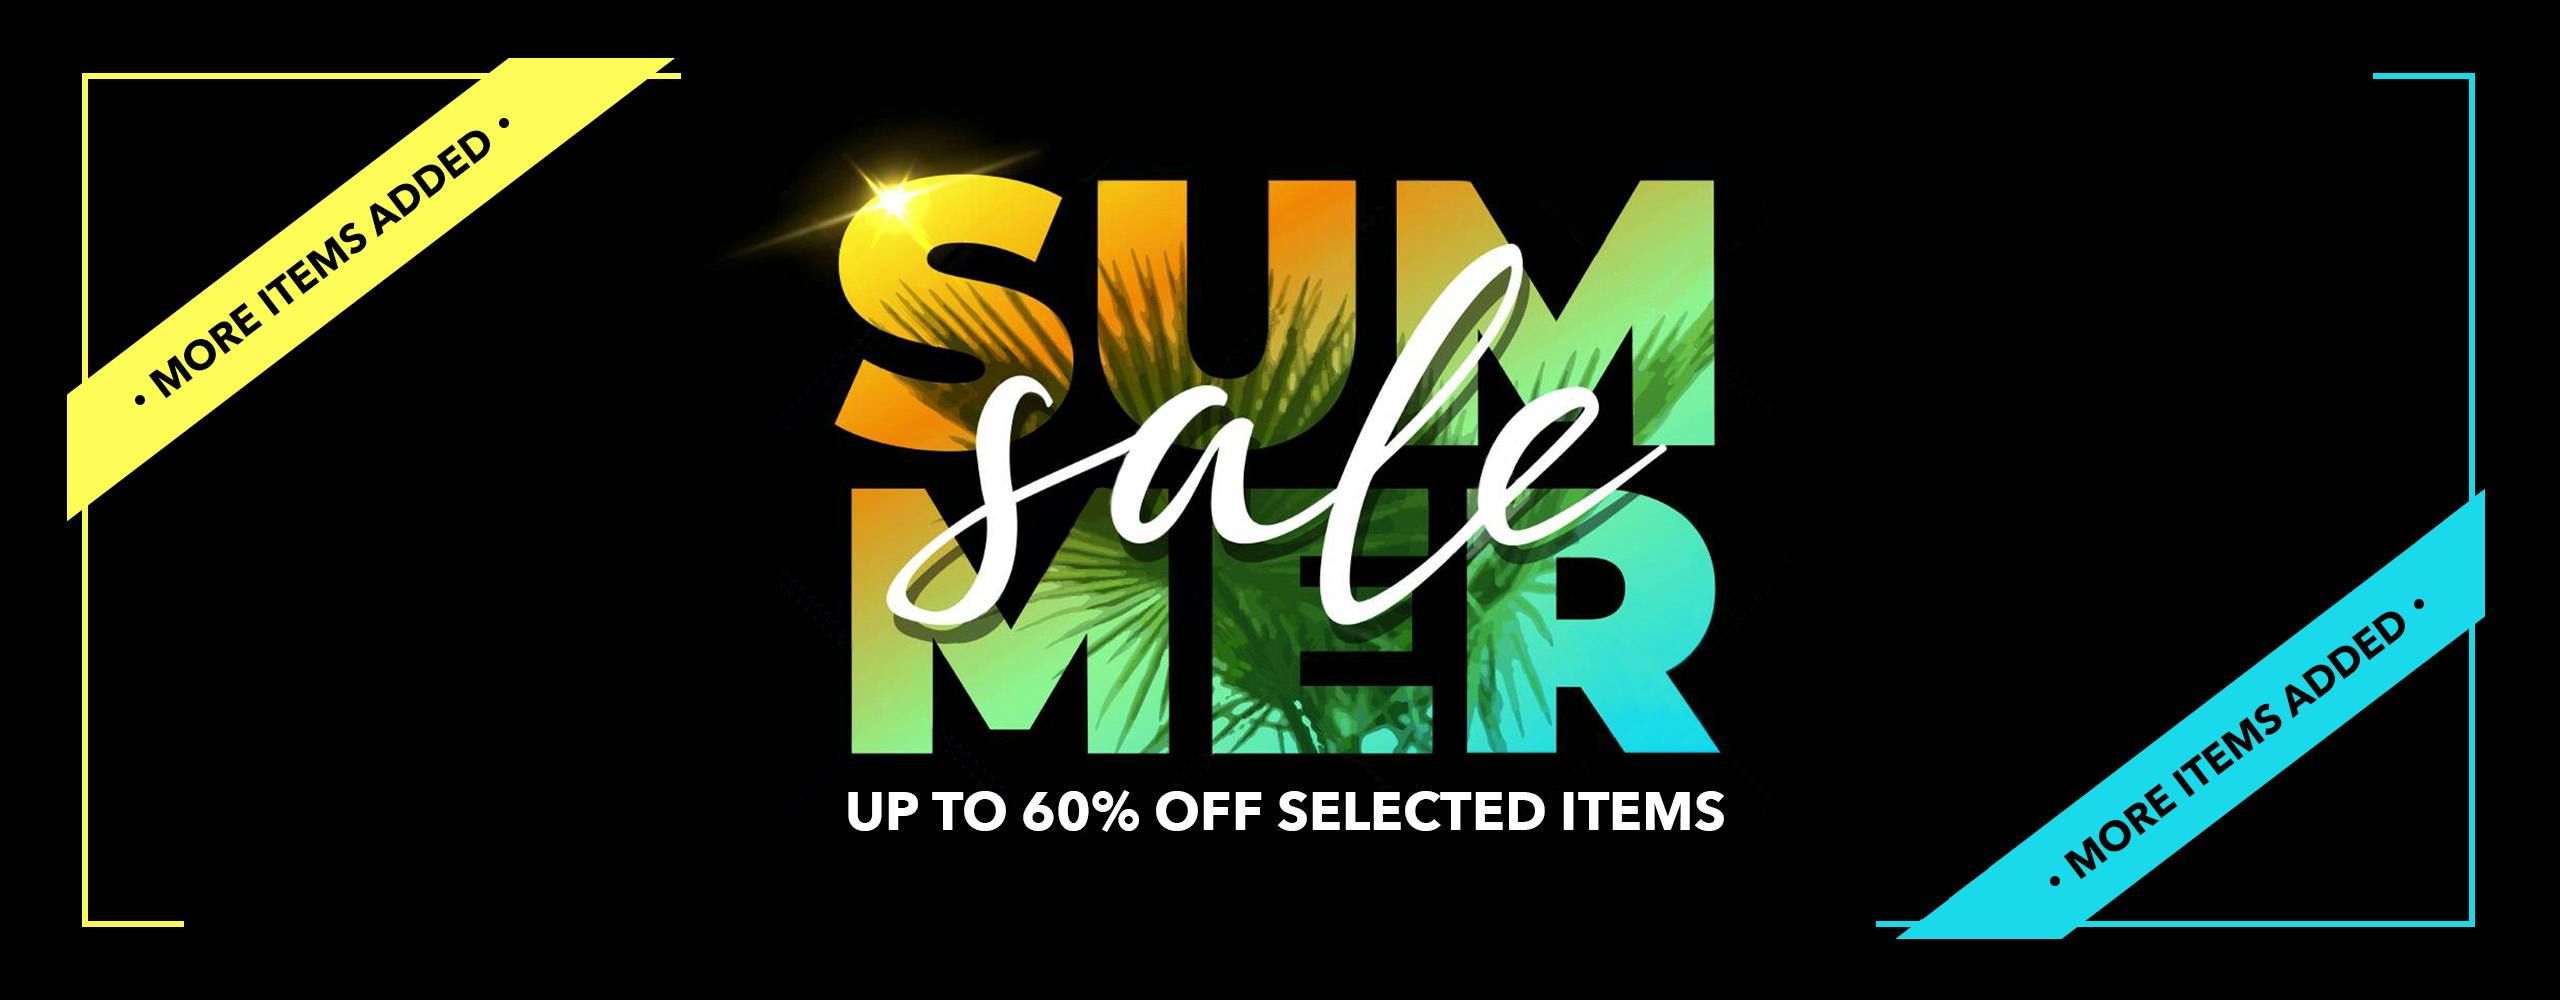 Summer Sale! 60% OFF Selected Items at Blitz.